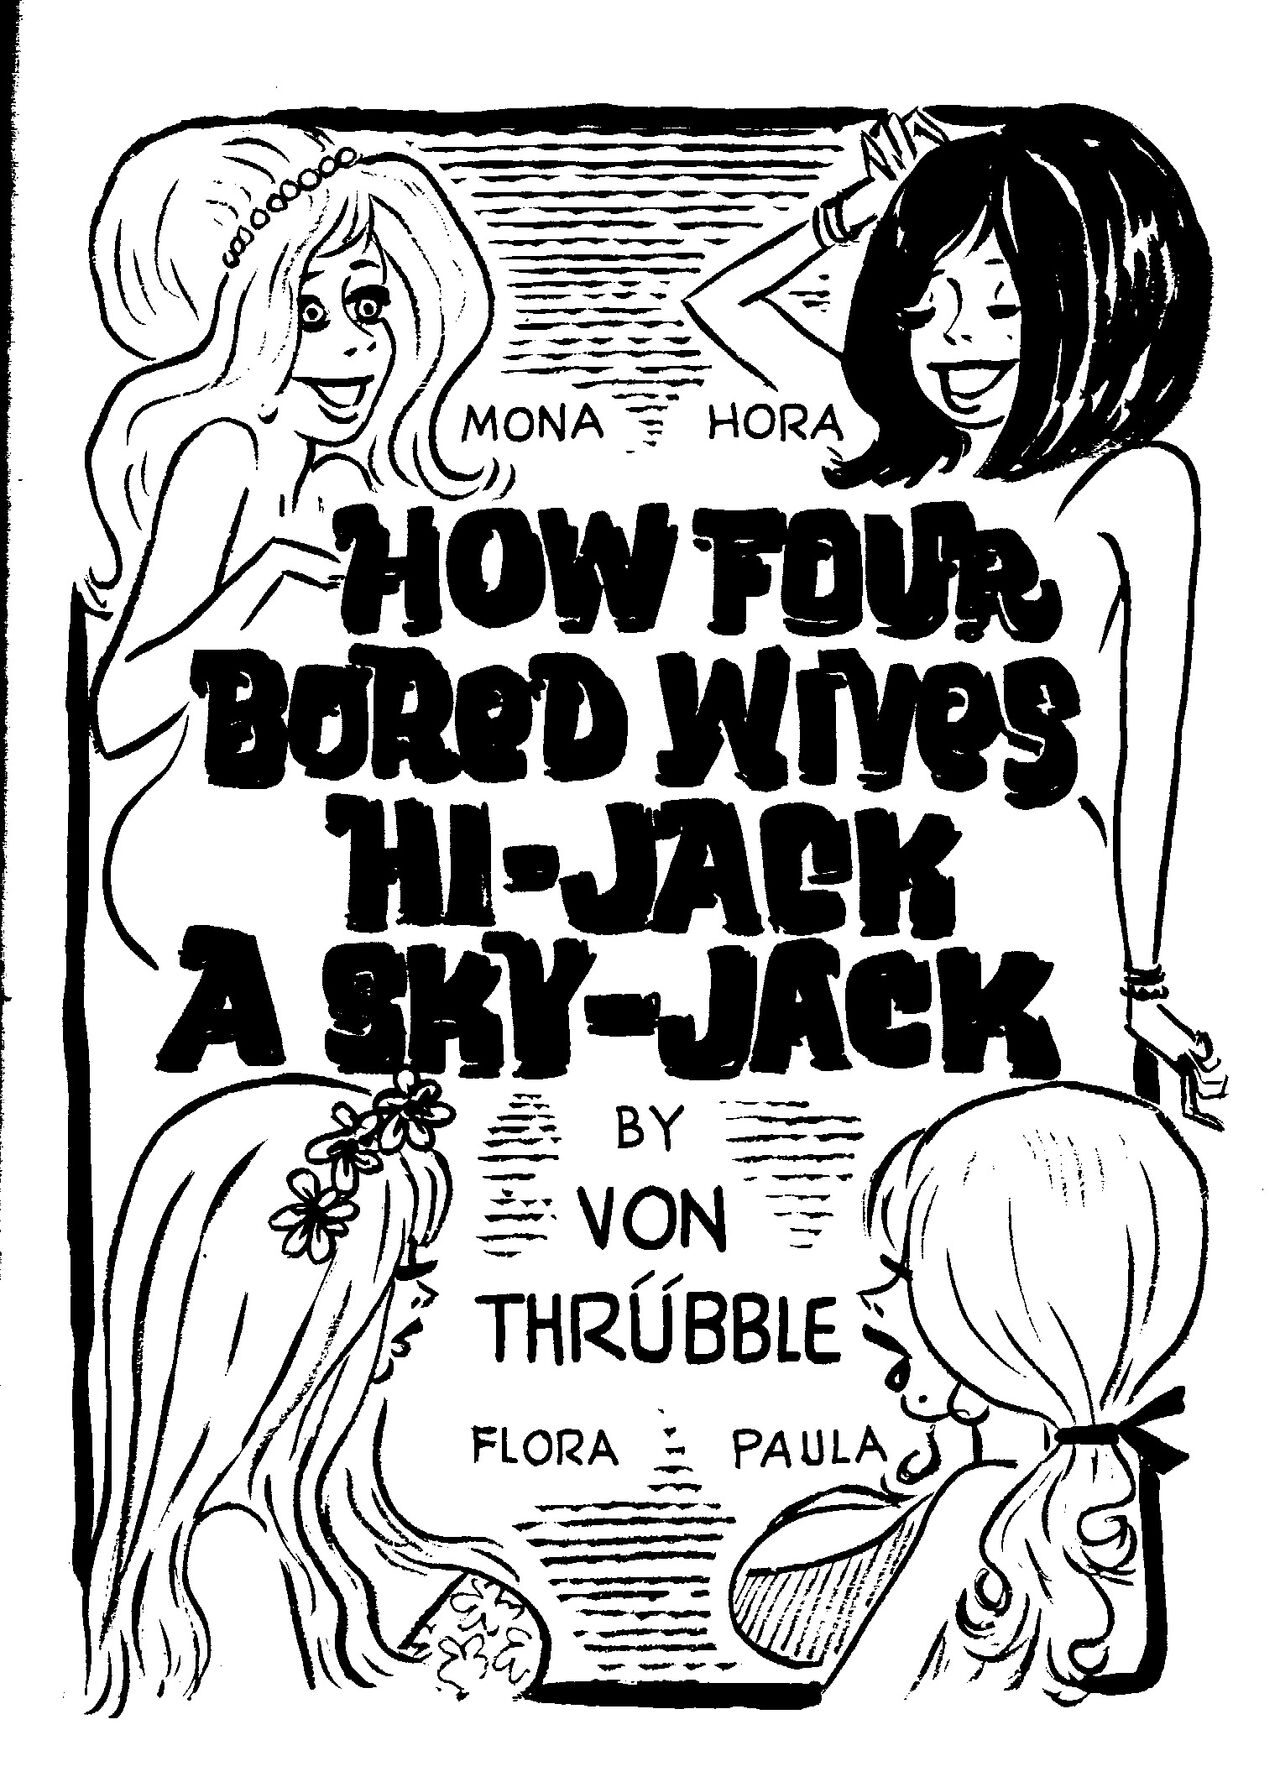 Four Bored Very Bored HouseWives (Art Hurric / Von Thrubble) 77